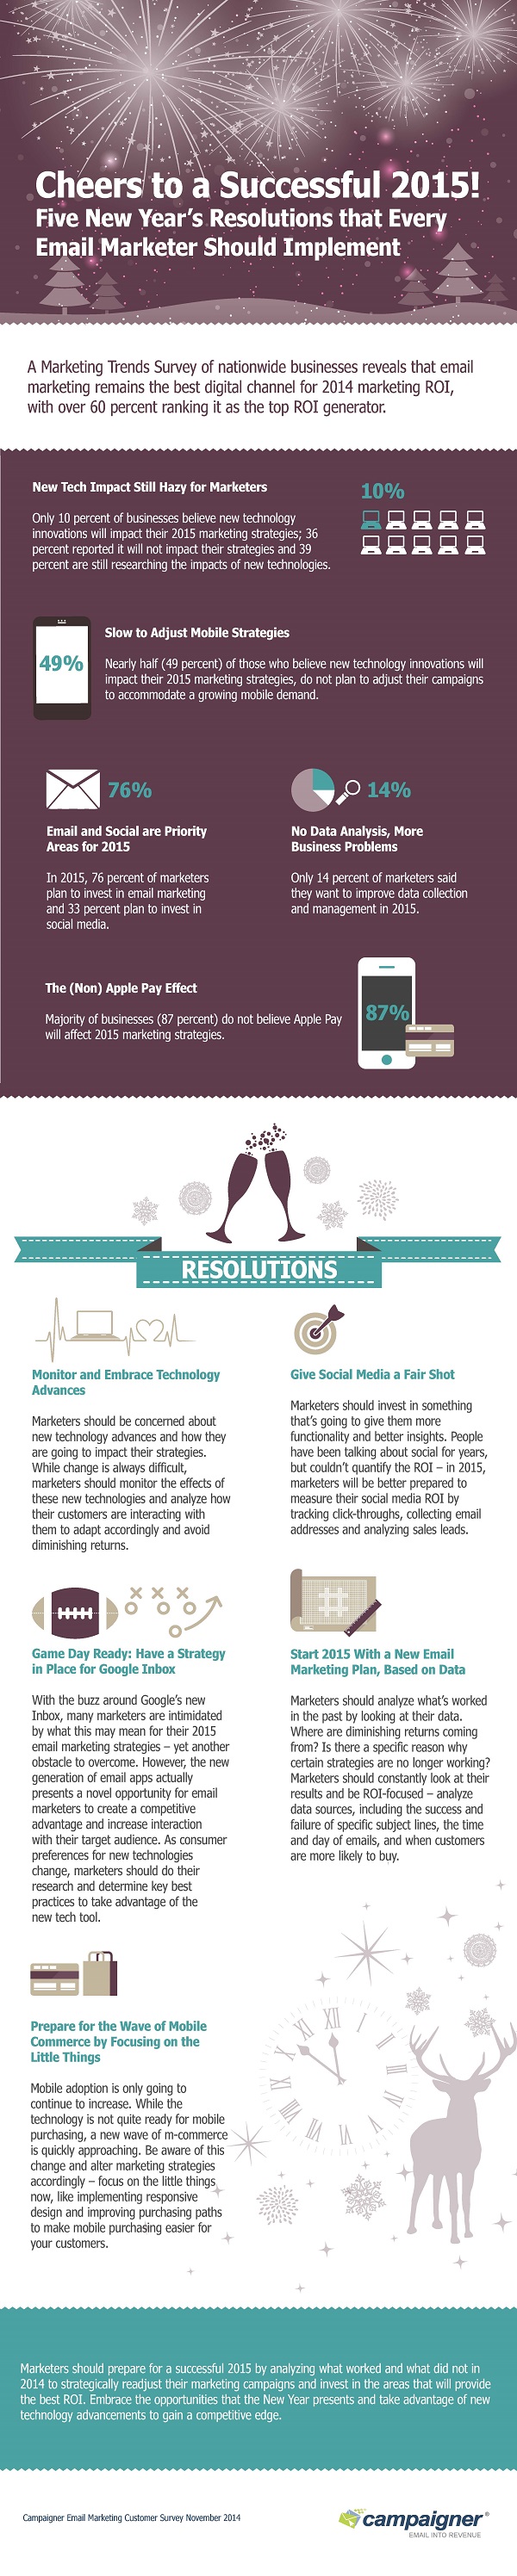 Infographic-Five-Email-Marketing-Resolutions-120414